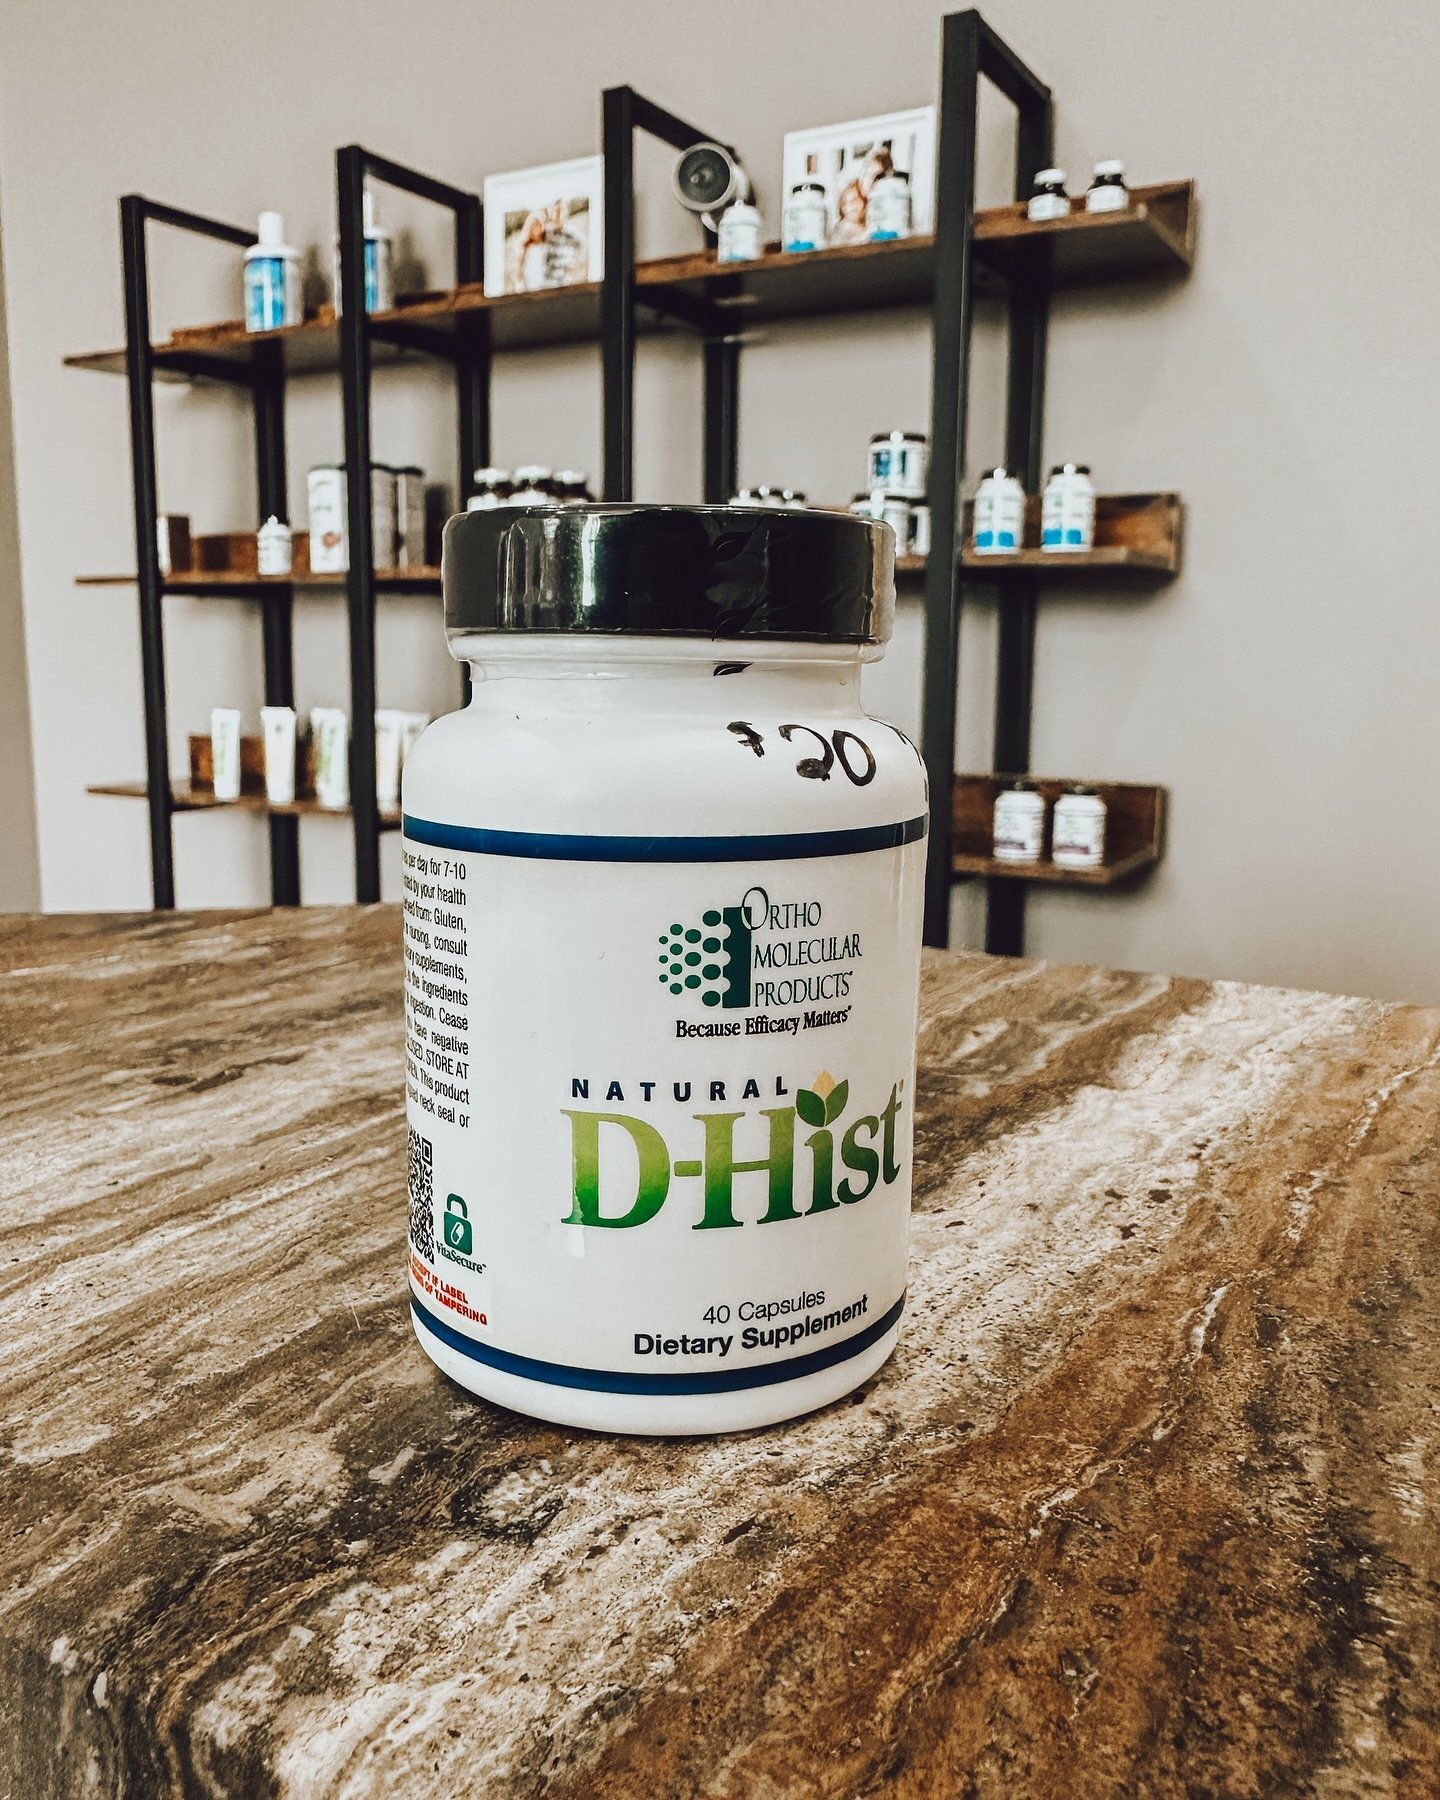 SUPPLEMENT HIGHLIGHT!!! 

Struggling with seasonal allergies? Been there, done that. But We&rsquo;ve found a game-changer: Ortho Molecular&rsquo;s D-Hist supplements. Here&rsquo;s the lowdown: Packed with natural ingredients like quercetin, stinging 